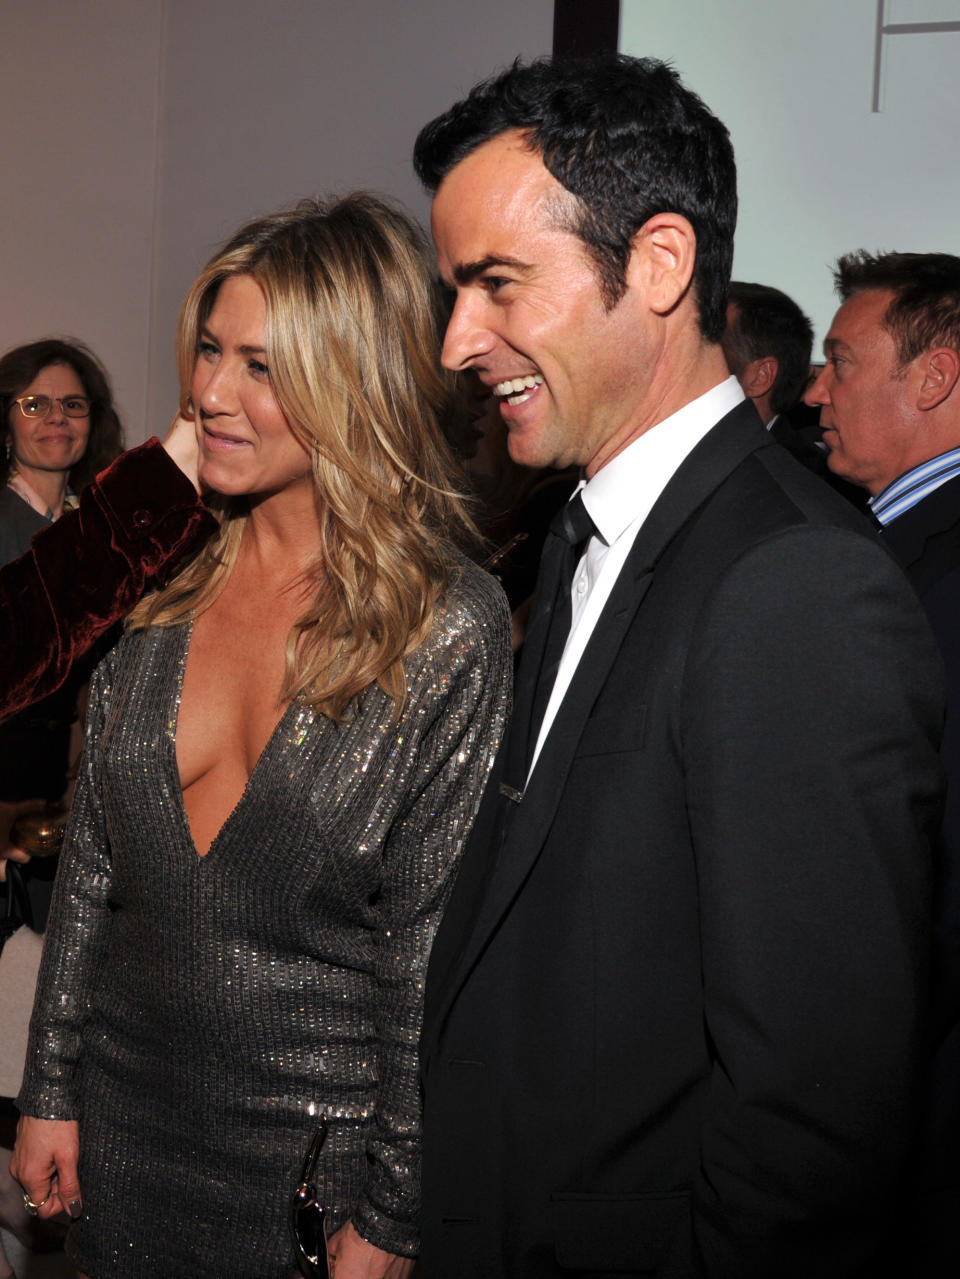 Actors Jennifer Aniston and Justin Theroux attend ELLE's 18th Annual Women in Hollywood Tribute held at the Four Seasons Hotel Los Angeles at Beverly Hills on October 17, 2011 in Beverly Hills, California.